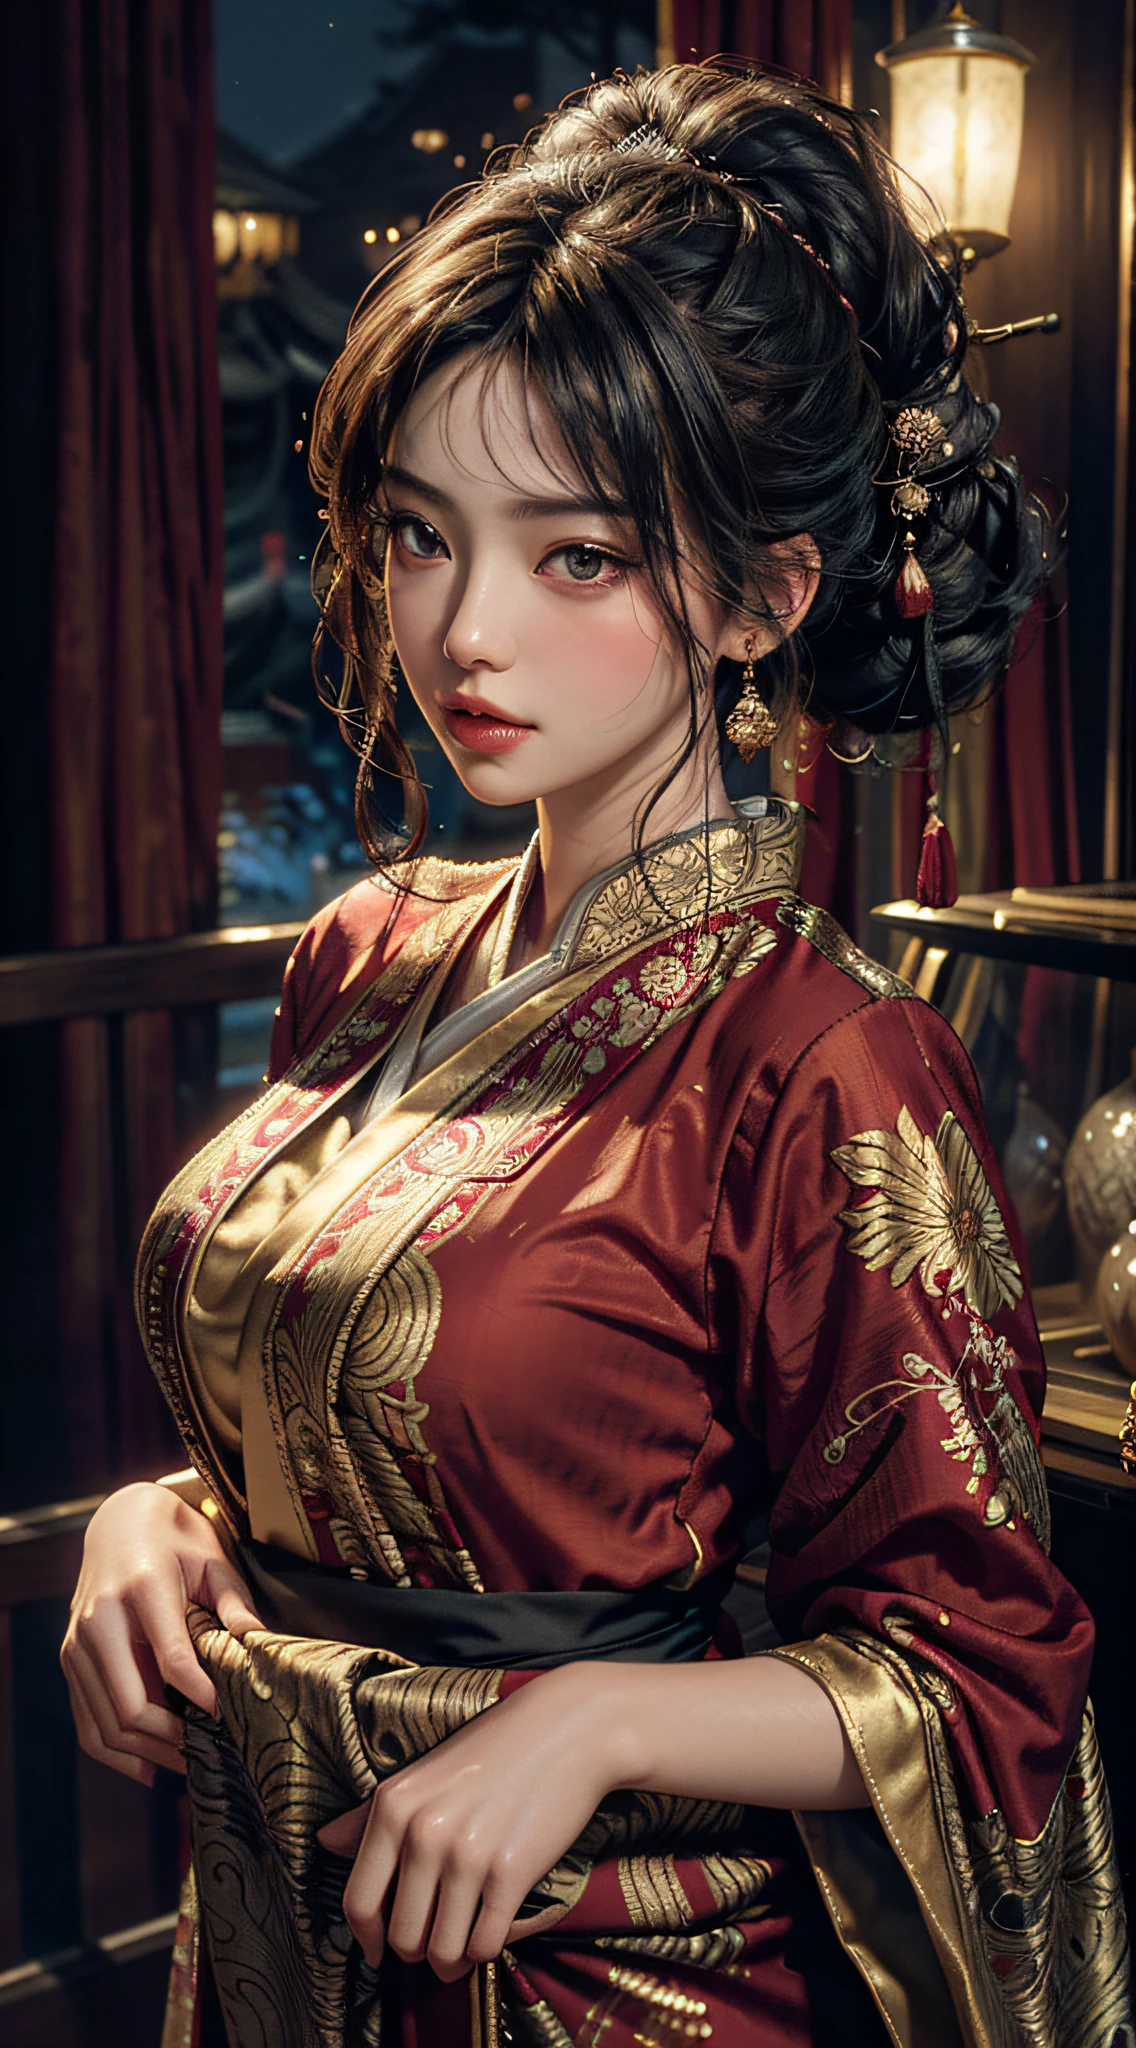 The art depicts a charming woman dressed in a flowing, silky traditional oriental dress, red, decorated with intricate patterns and bright colors. Her dress drapes elegantly over her curvy figure, accentuating her seductive silhouette. She stood gracefully in the quiet moonlit night, bathed in the soft glow of the moonlight. The scene exudes an ethereal and dreamy atmosphere, with a touch of mystery and sexiness. The graphic style blends watercolor and digital illustration techniques to evoke a refined beauty and charm. The lights are filled with soft moonlight, casting soft highlights and shadows on her charming features.